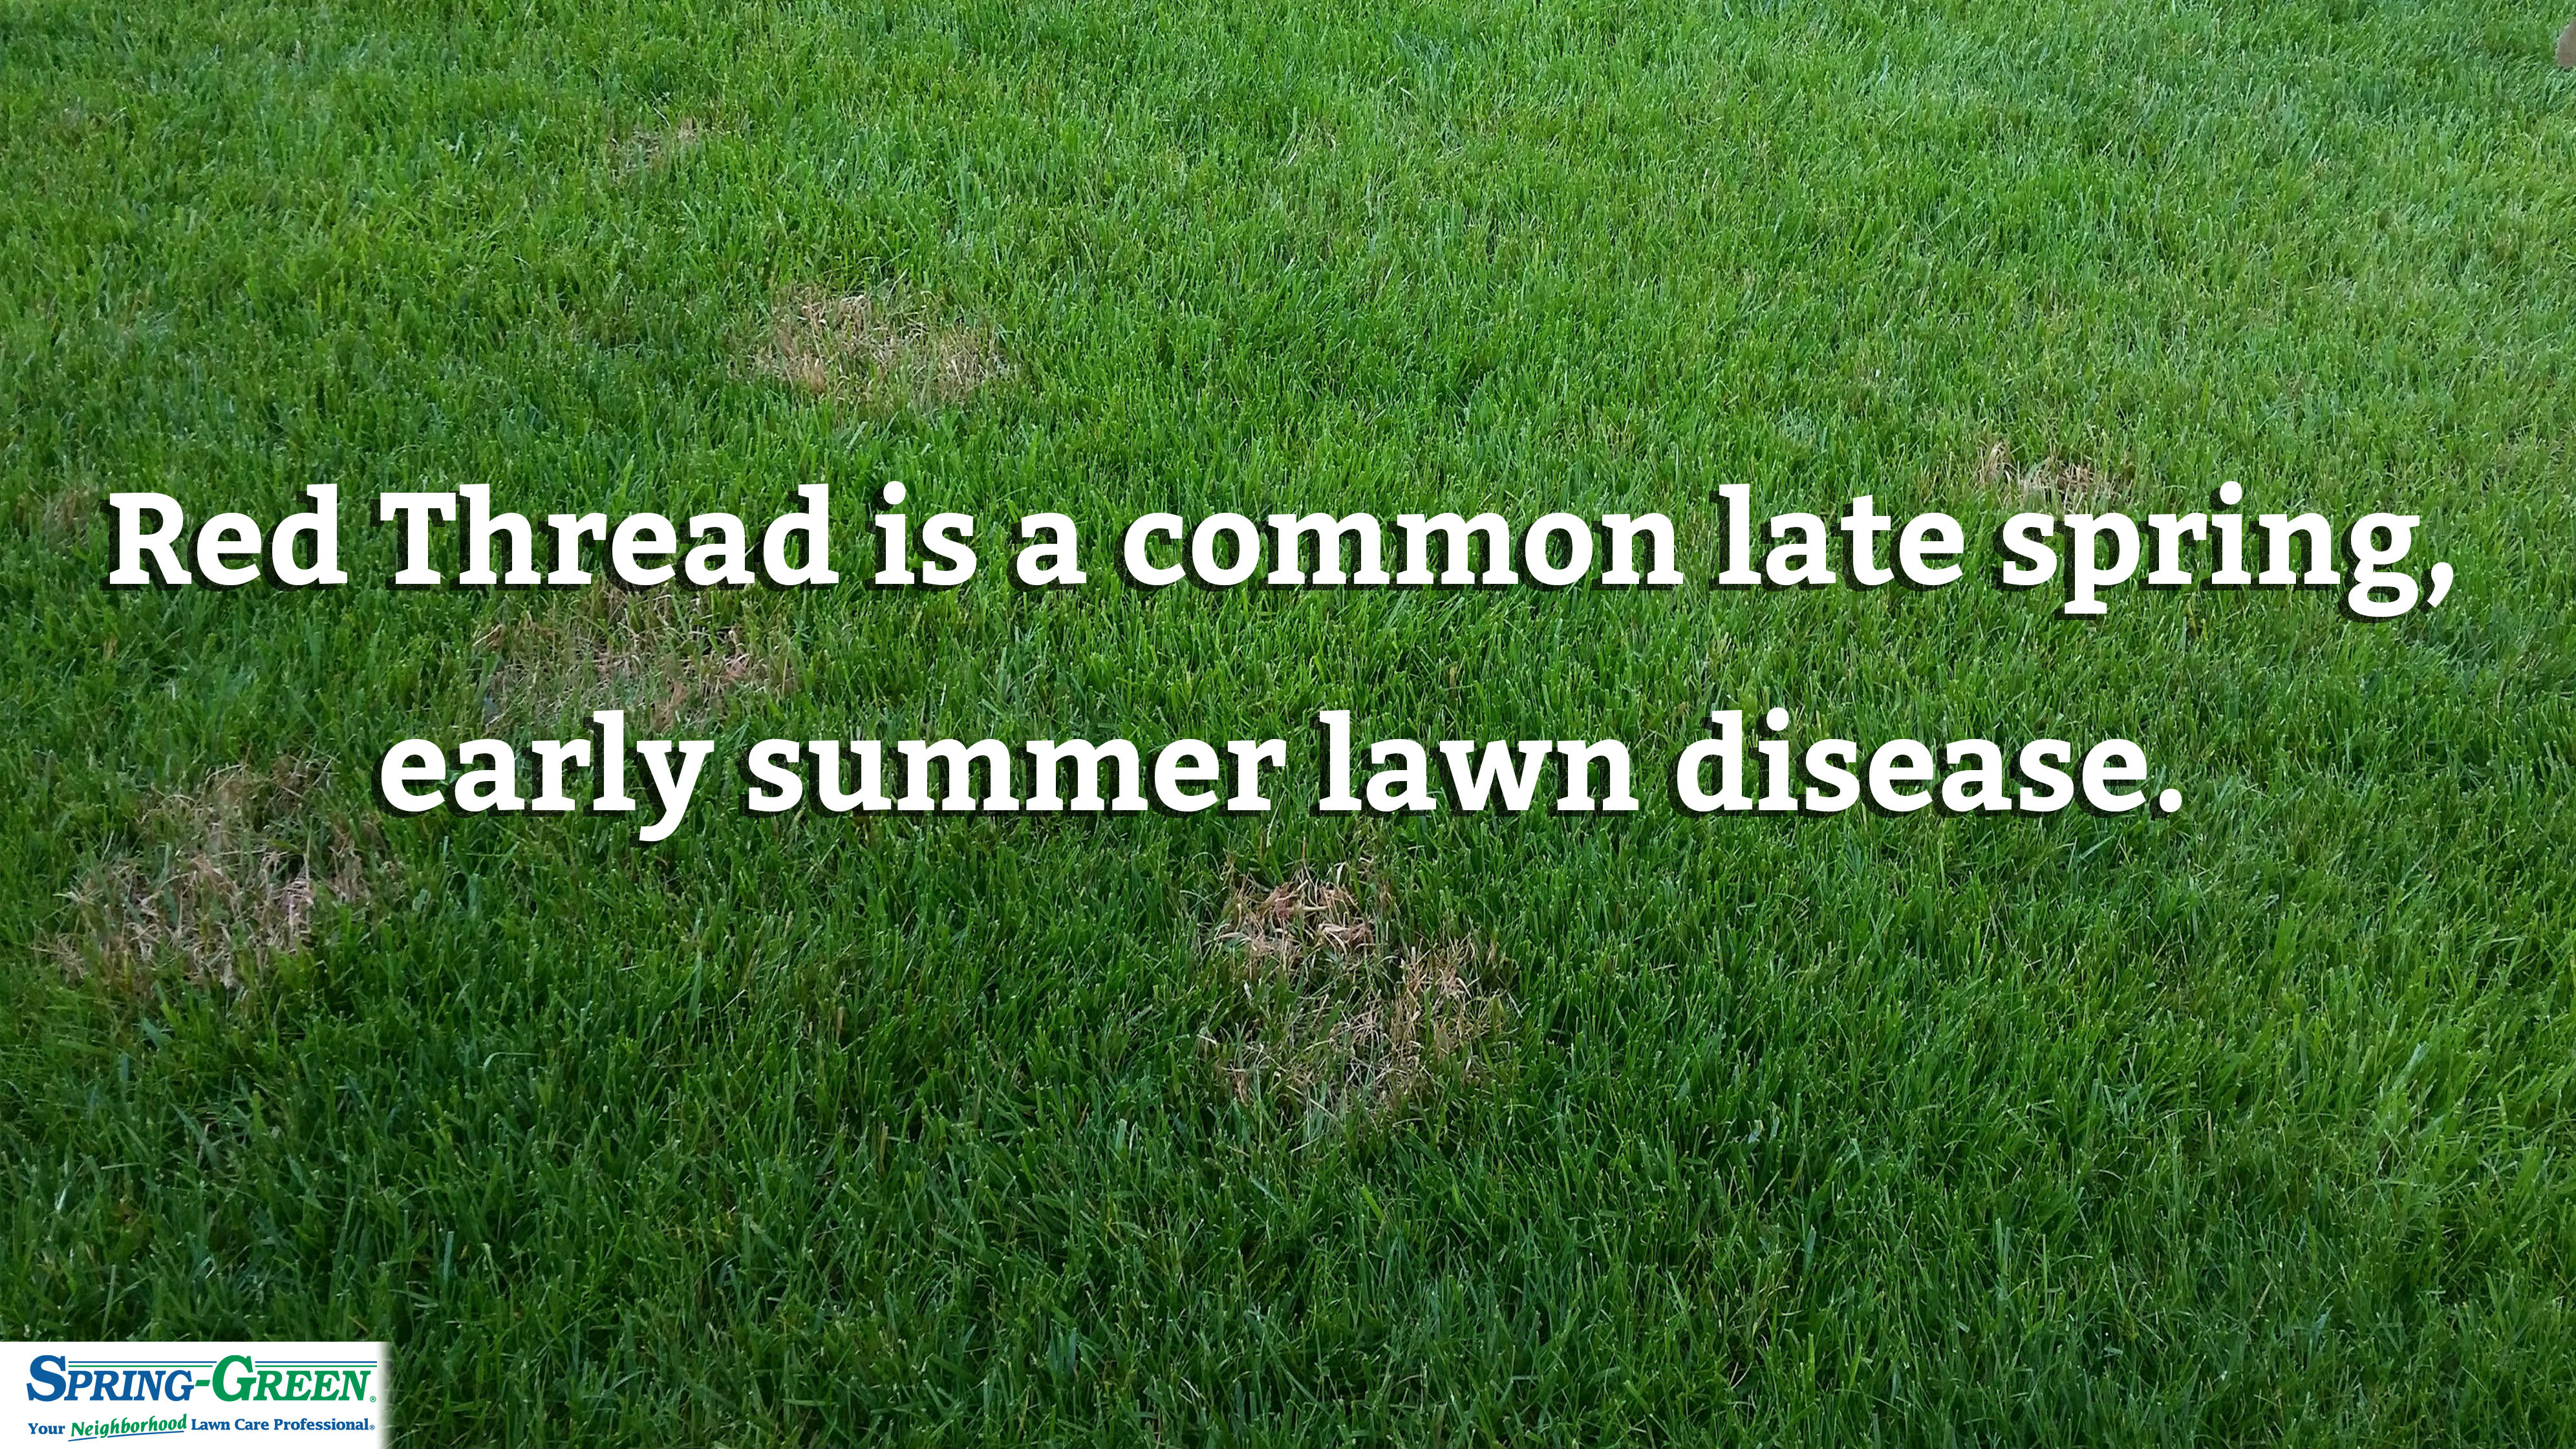 How To Control And Treat Red Thread Lawn Disease